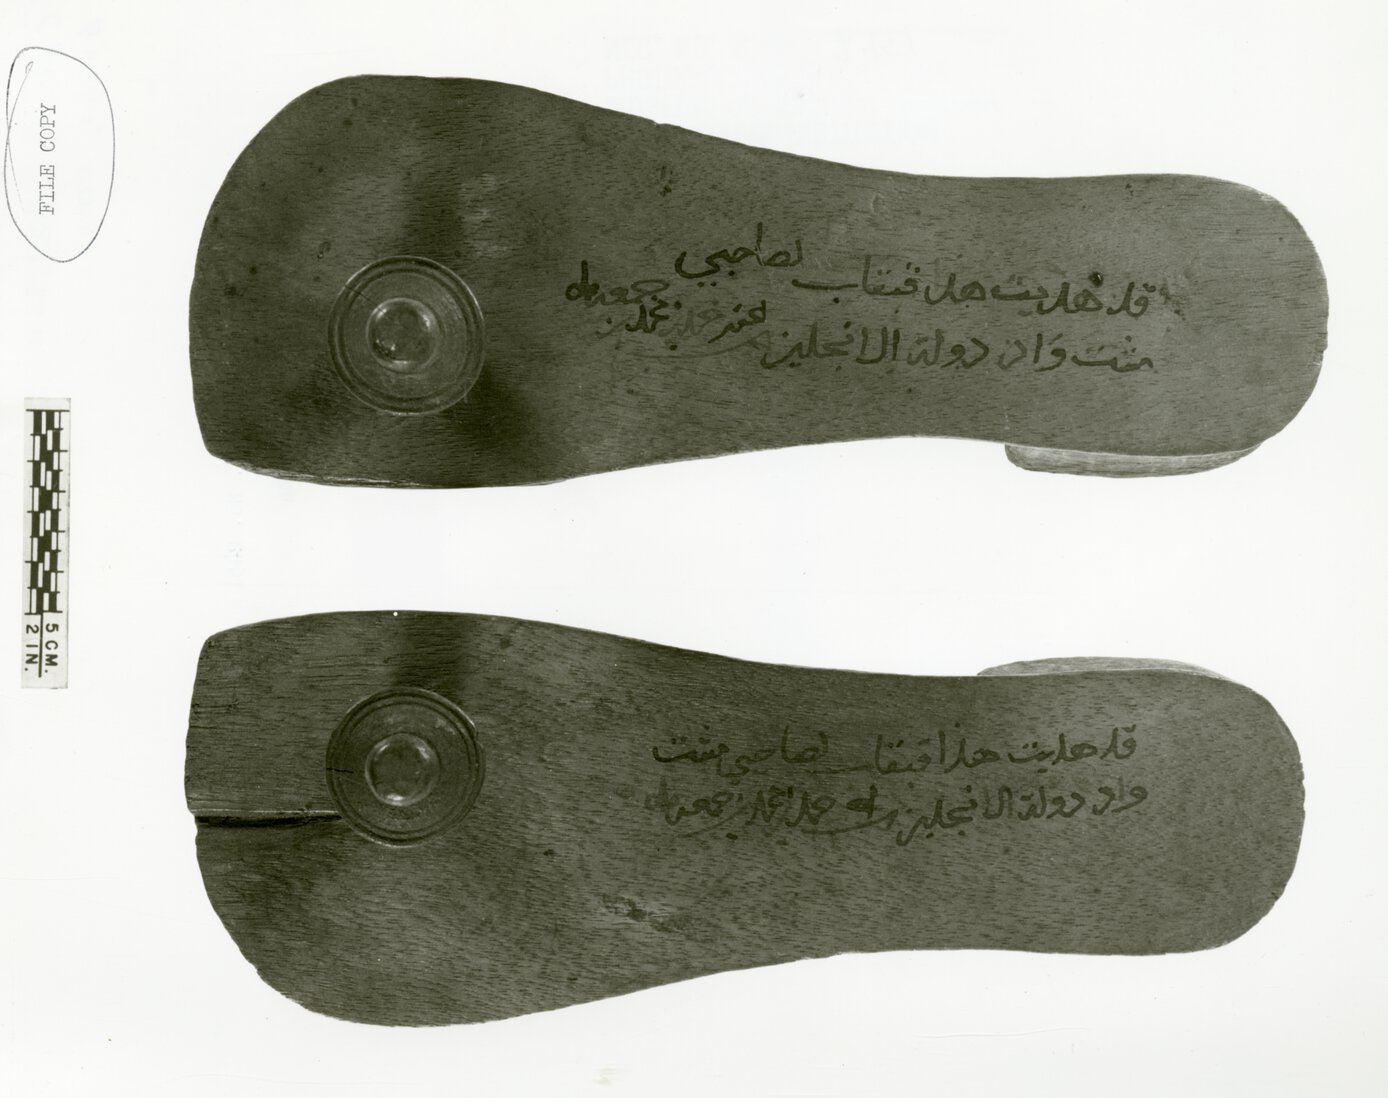 Tippu Tip's inscribed clogs side by side, as viewed from the top with Arabic inscriptions showing.